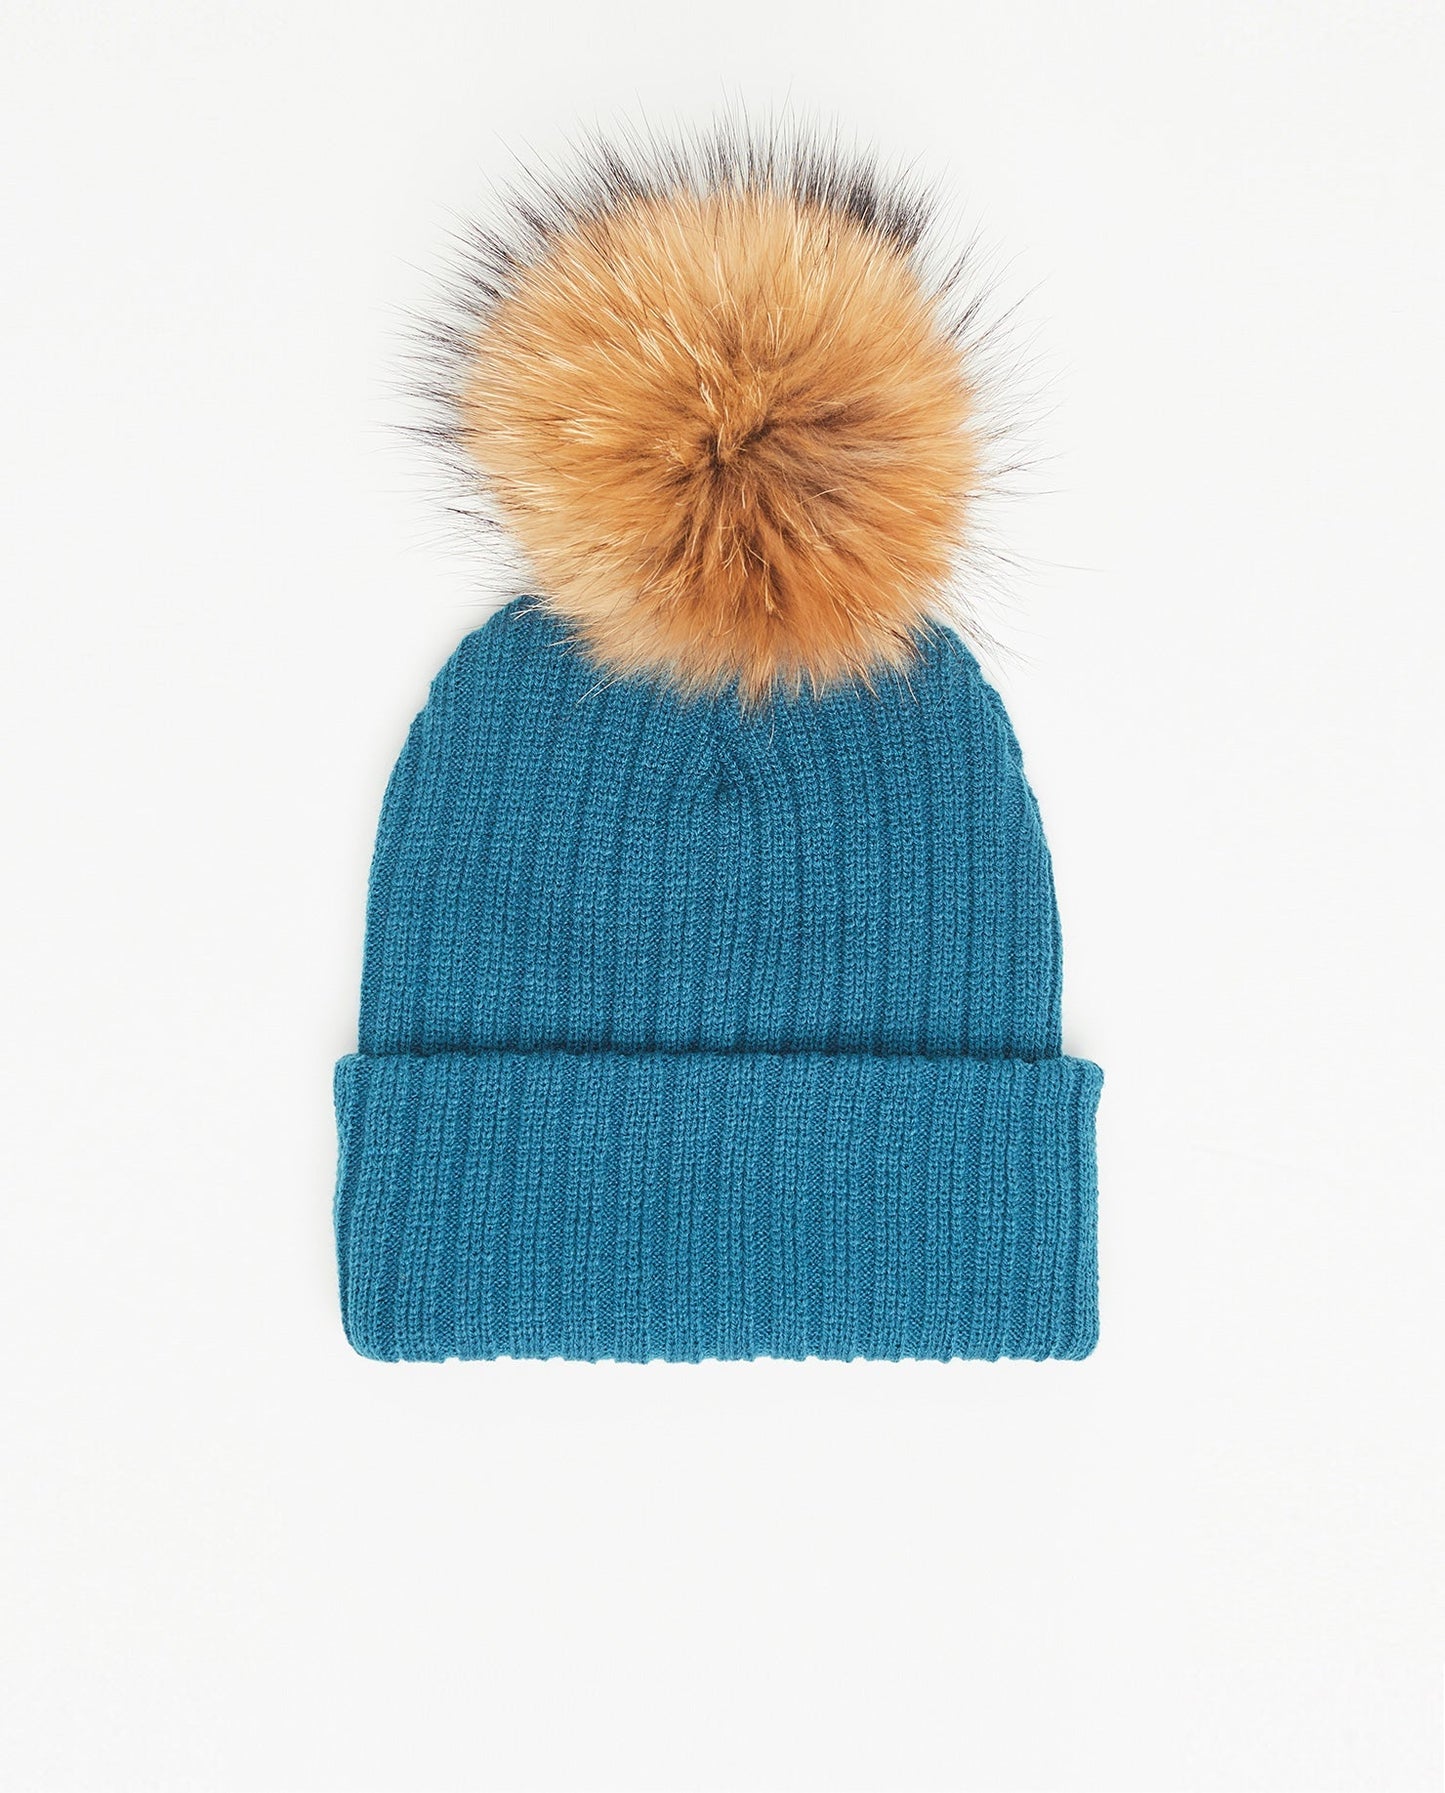 Turquoise Knit Beanie